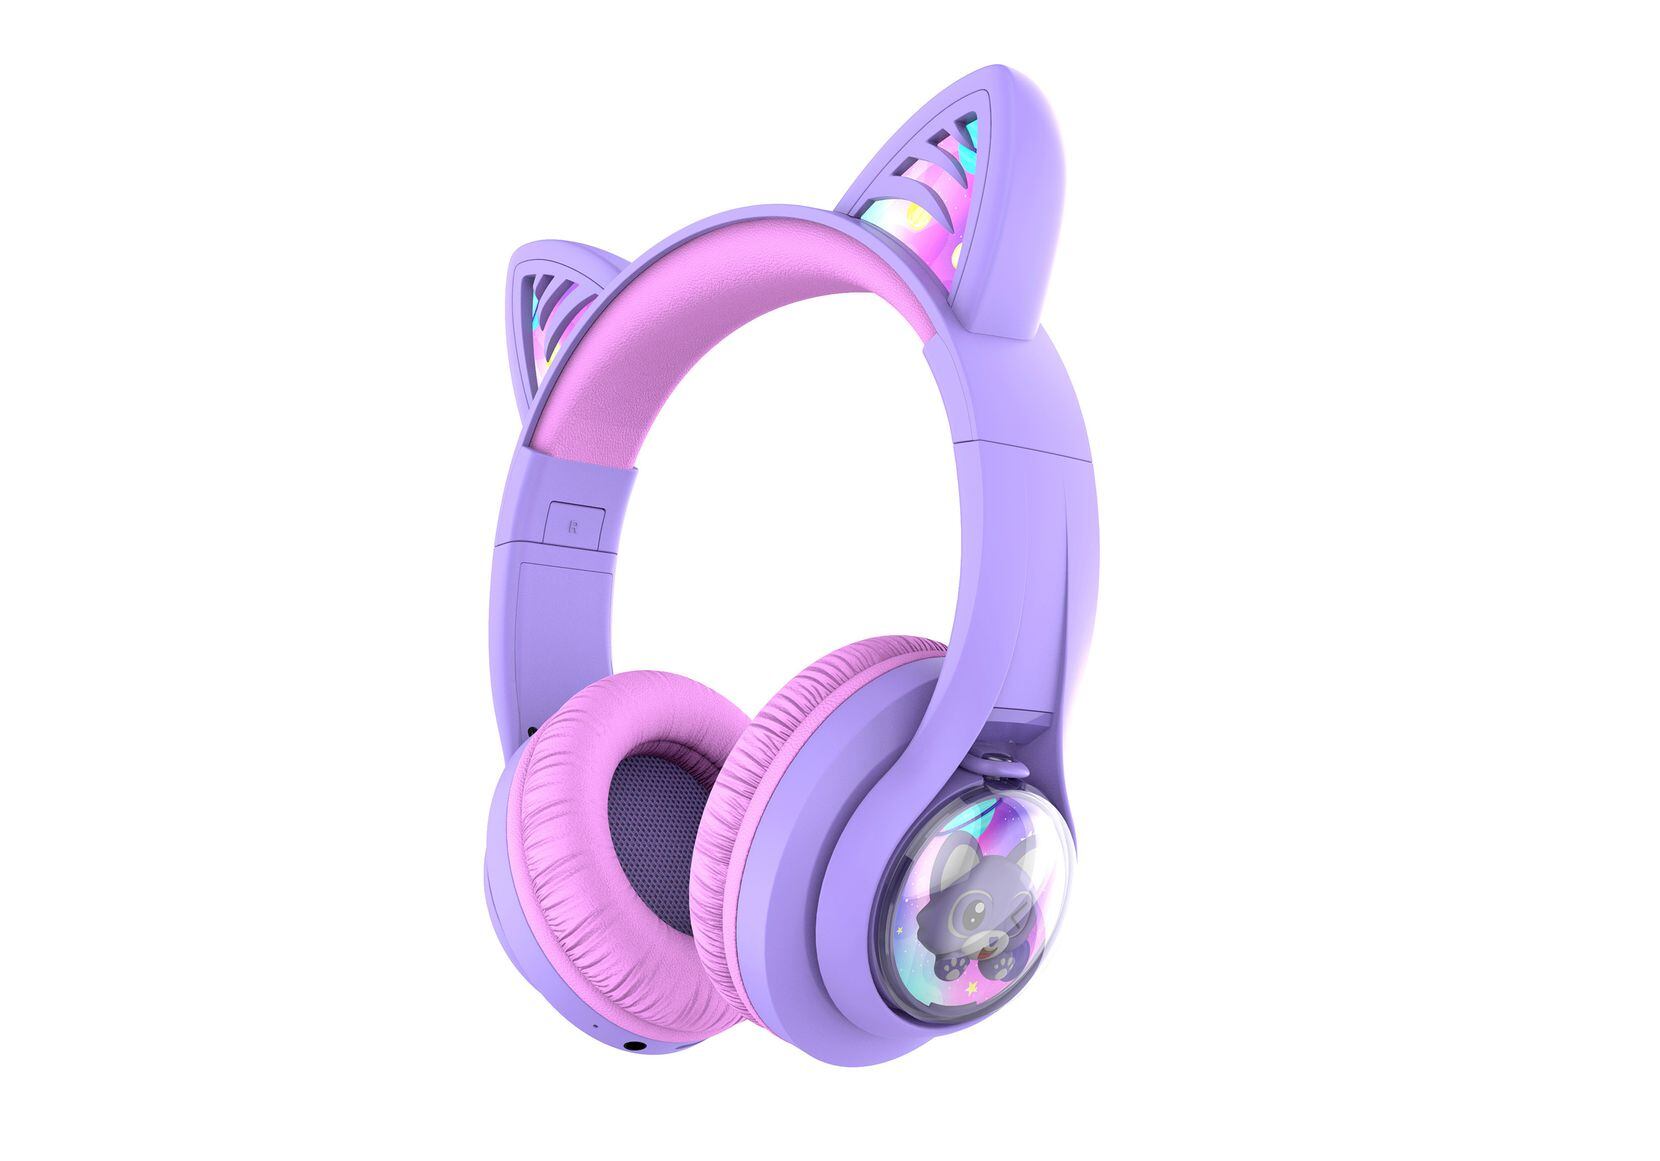 The iClever Cat Ear Bluetooth Headphone is designed for kids ages 3 and up.